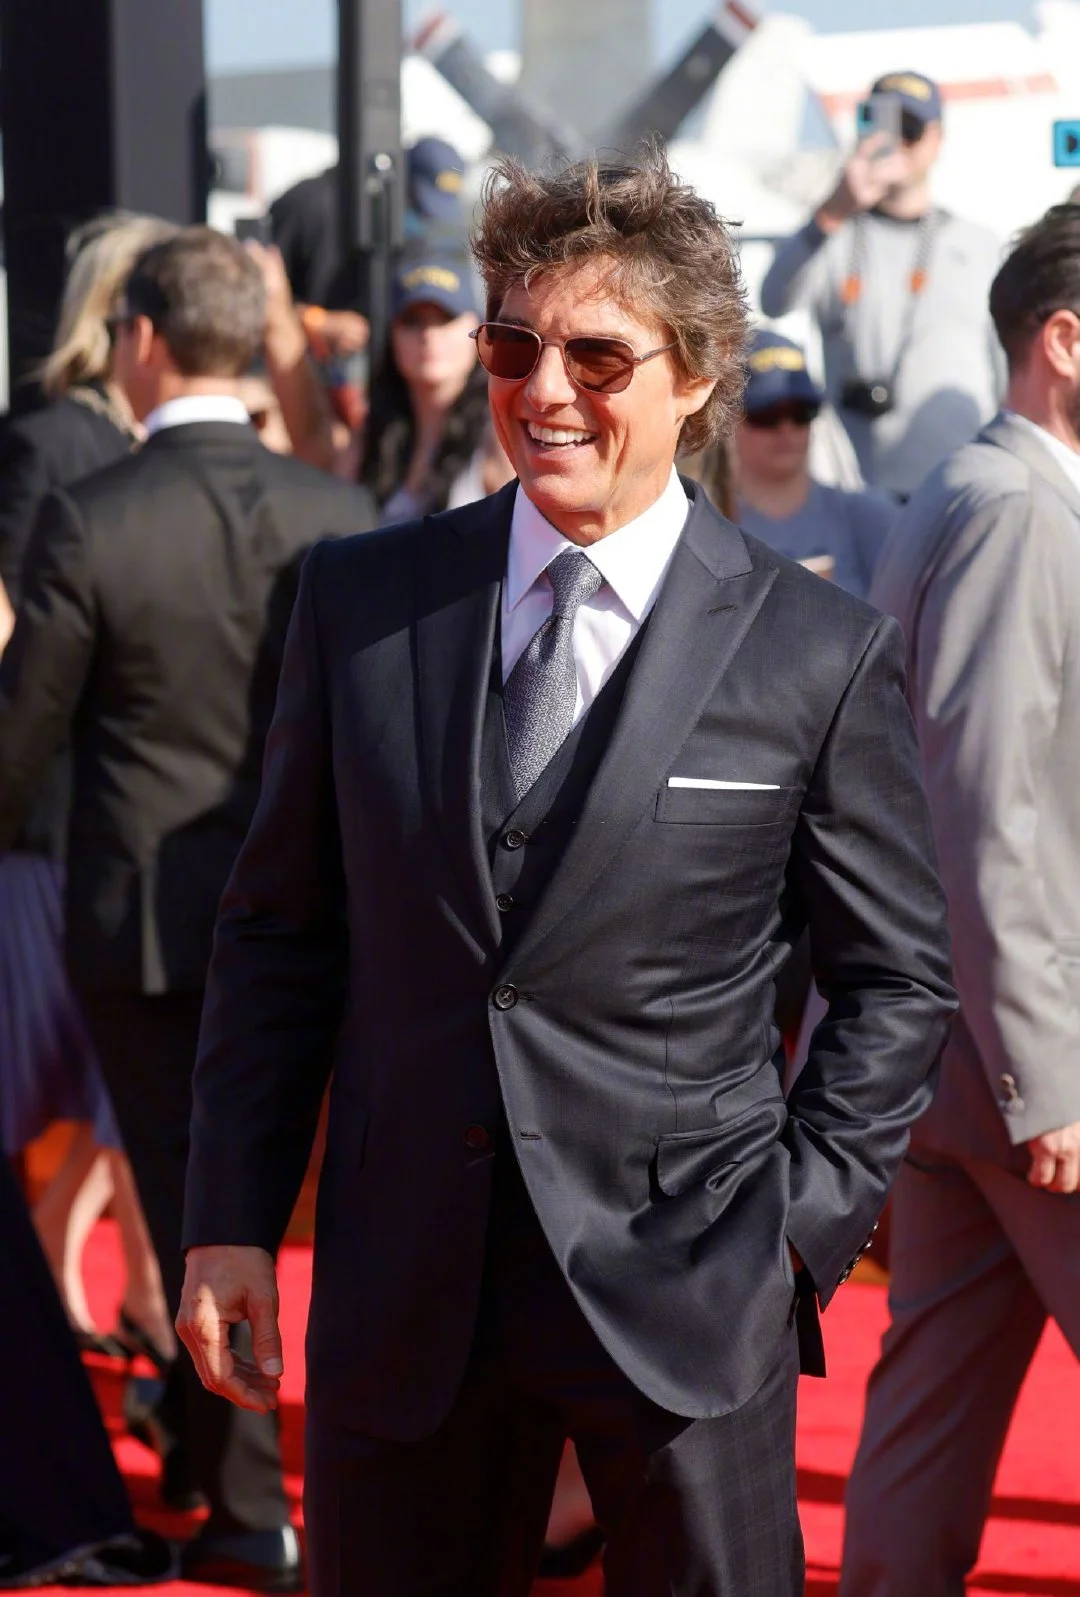 Tom Cruise lands in a helicopter at the world premiere of "Top Gun: Maverick"